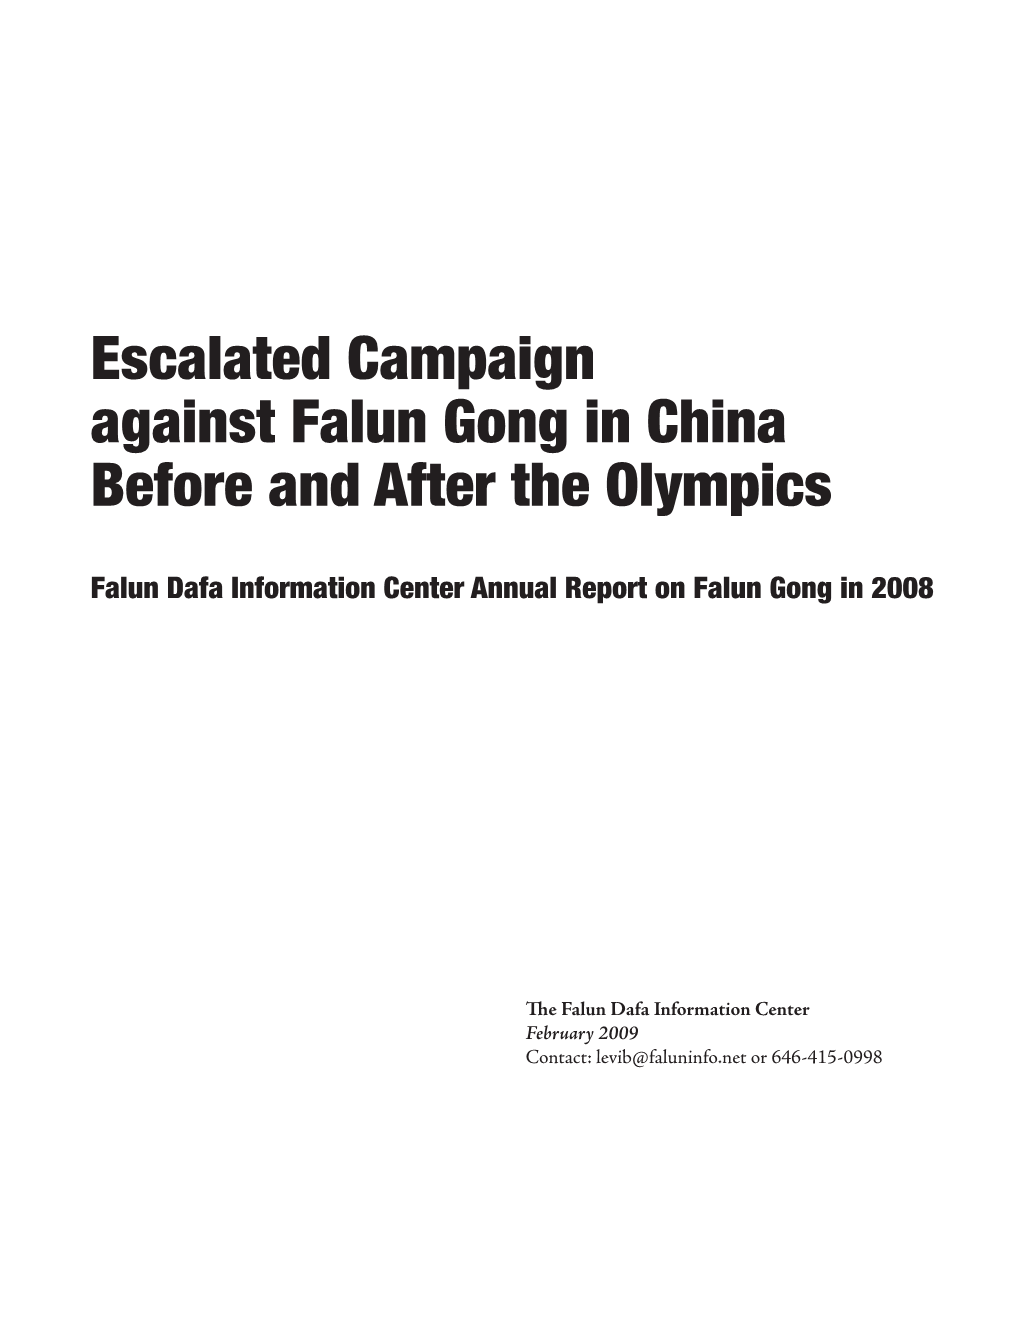 Escalated Campaign Against Falun Gong in China Before and After the Olympics